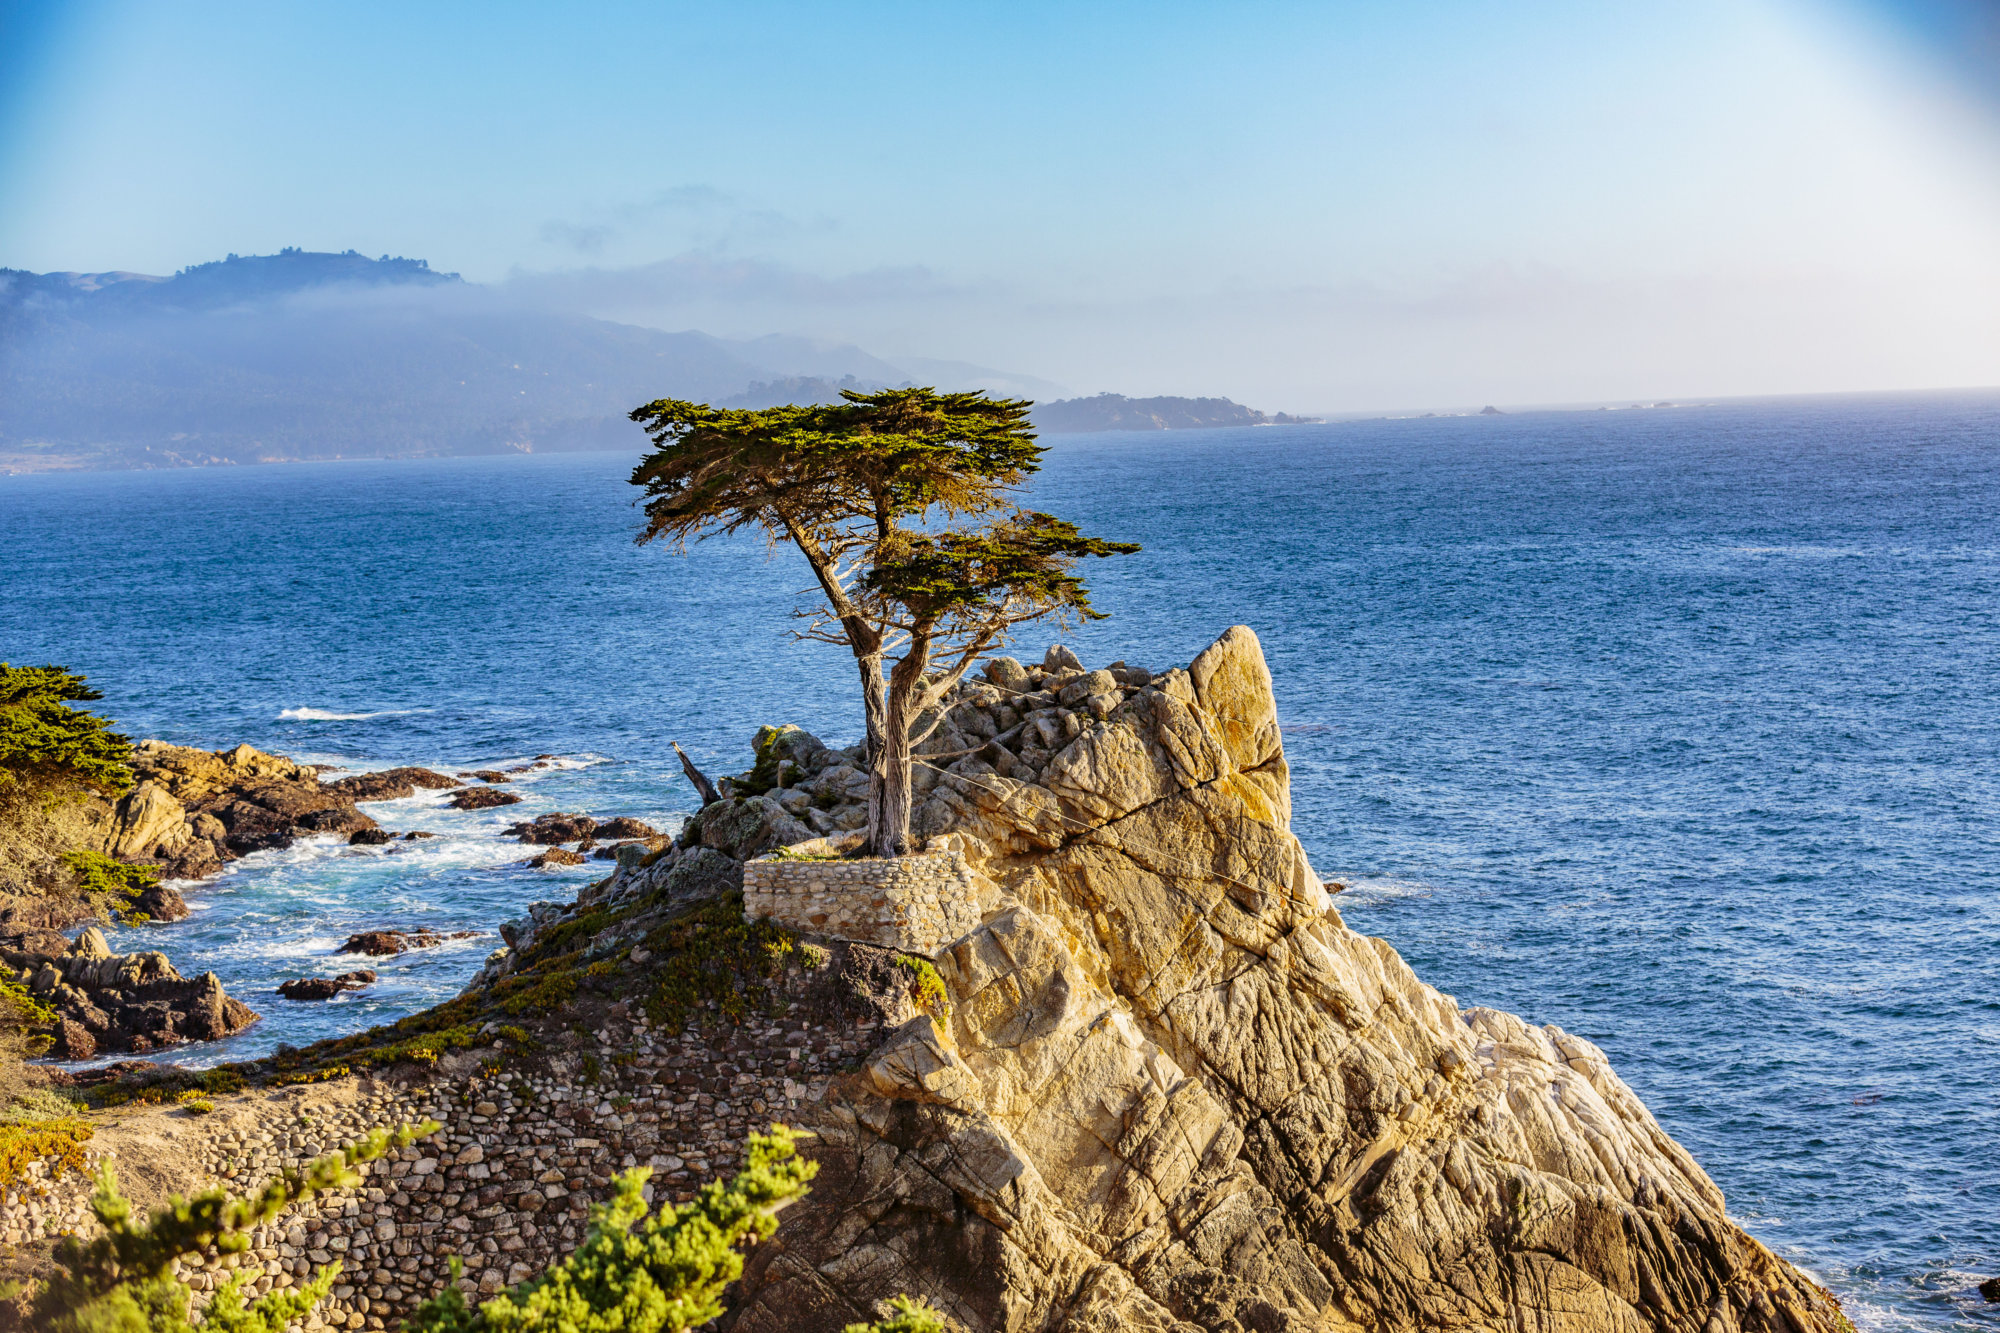 Pebble Beach, California, February 17, 2018:  The Lone Cypress is an iconic tree that stands on top of a granite outcropping in Pebble Beach, between Pacific Grove and Carmel-by-the-Sea. It is a Monterey cypress, endemic to just a few native groves in Carmel, Pebble Beach and Point Lobos.